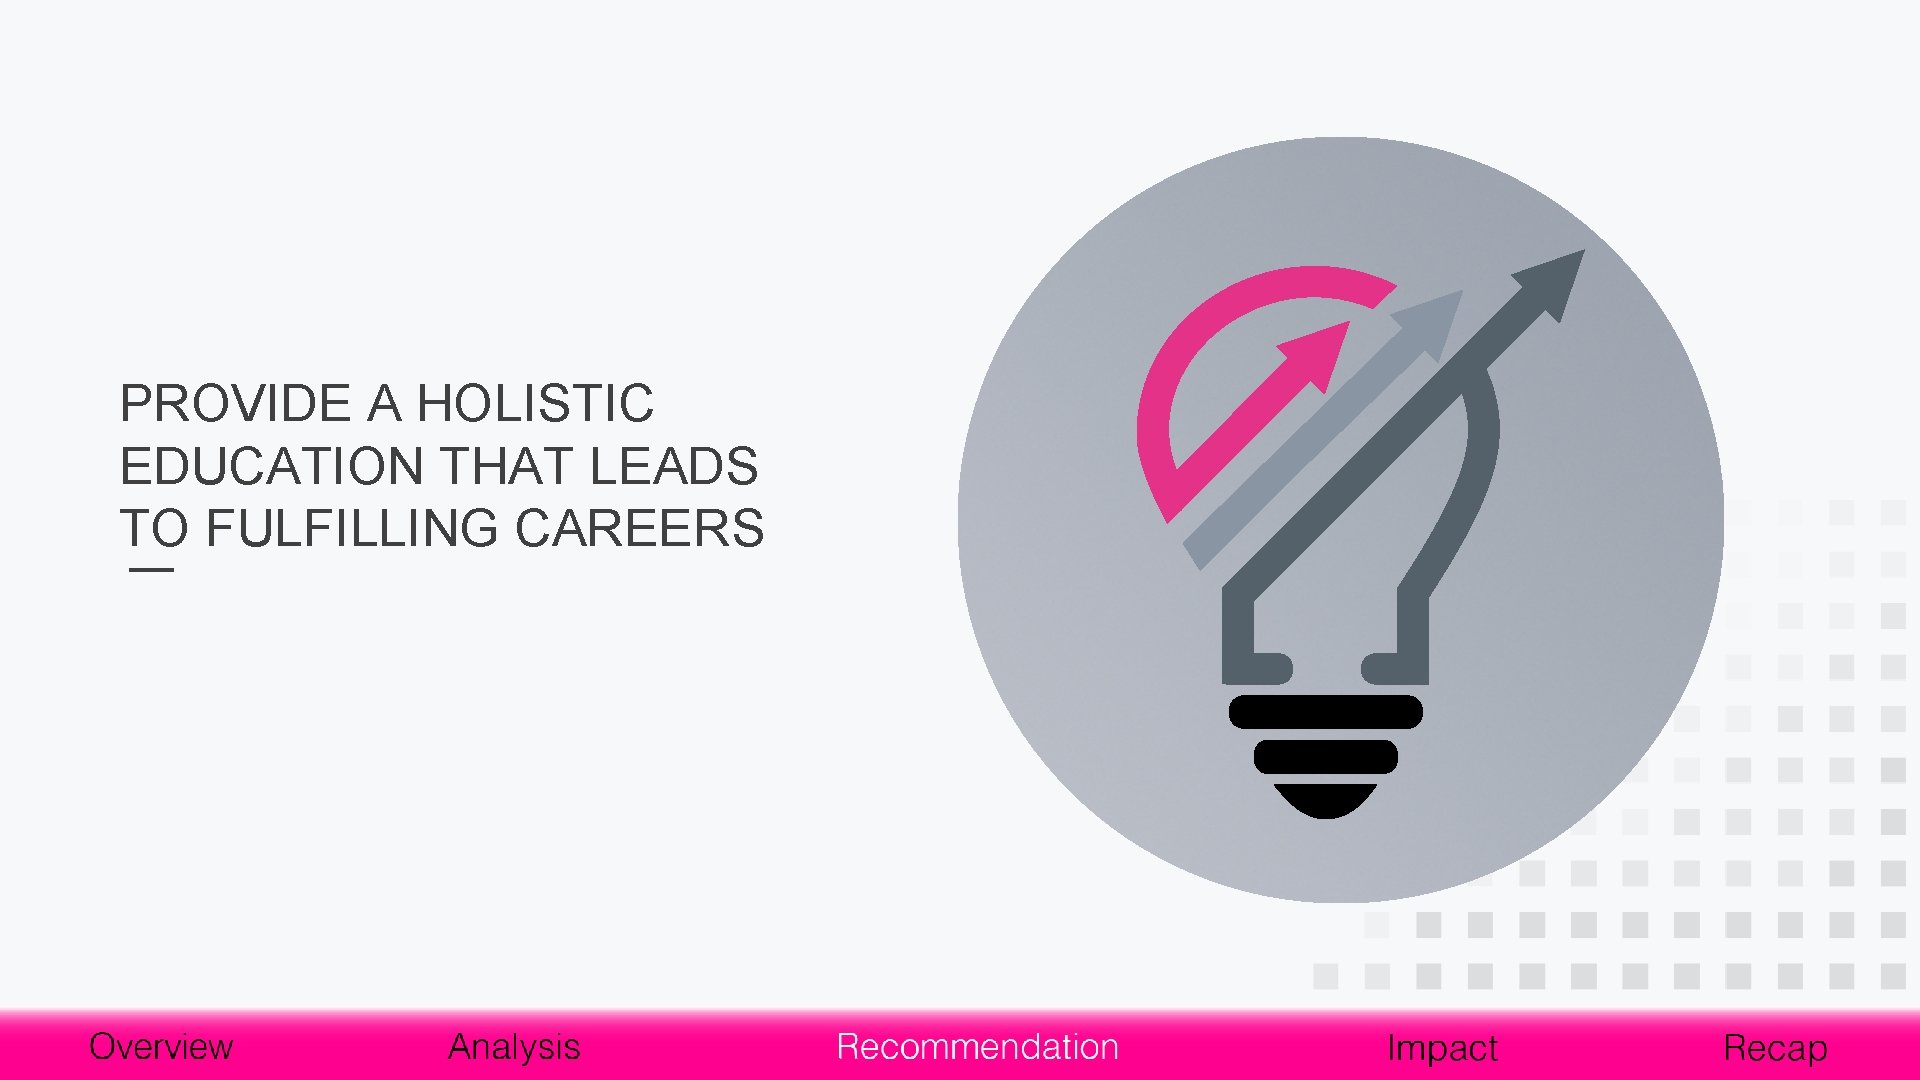 PROVIDE A HOLISTIC EDUCATION THAT LEADS TO FULFILLING CAREERS 